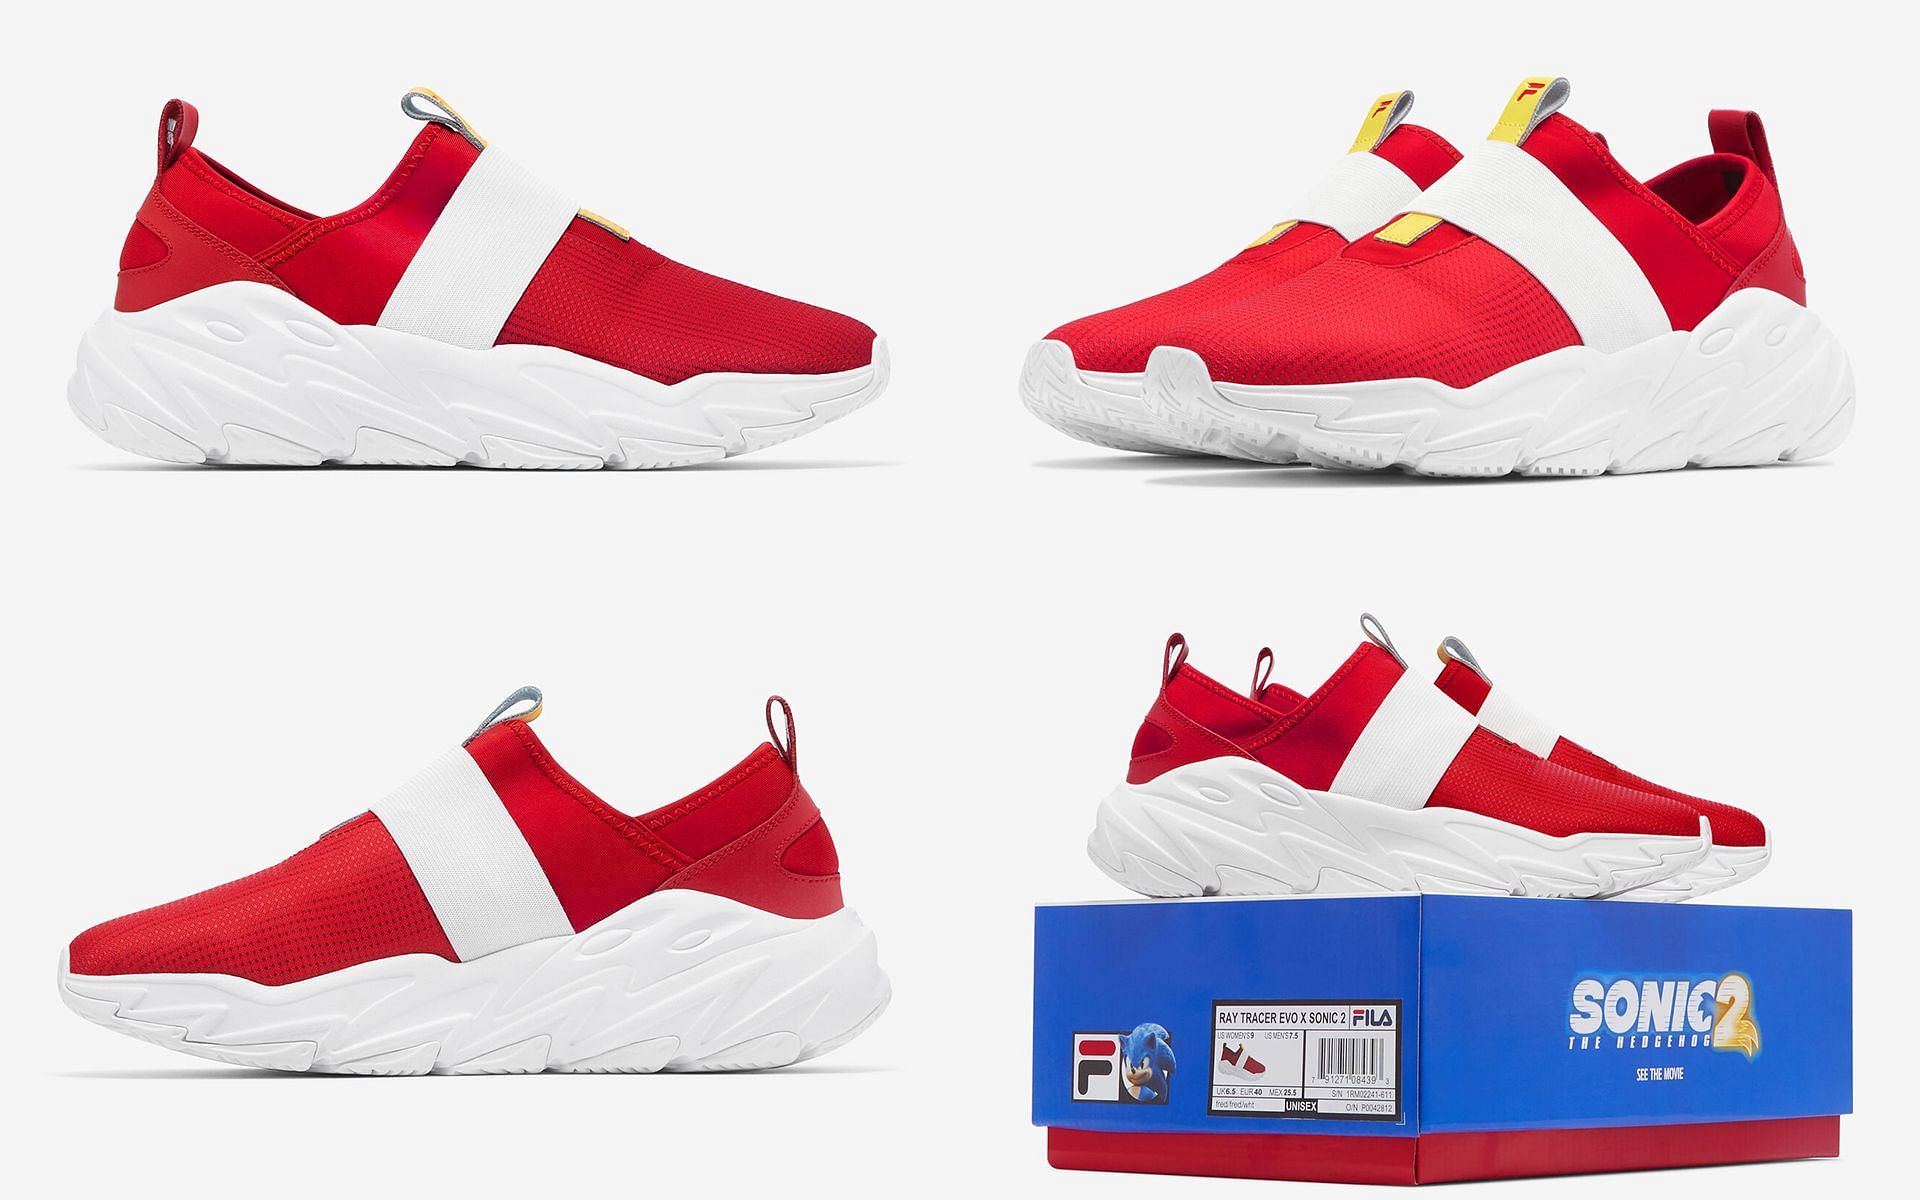 Where buy Fila x Sonic the Hedgehog 2 sneakers? release and more